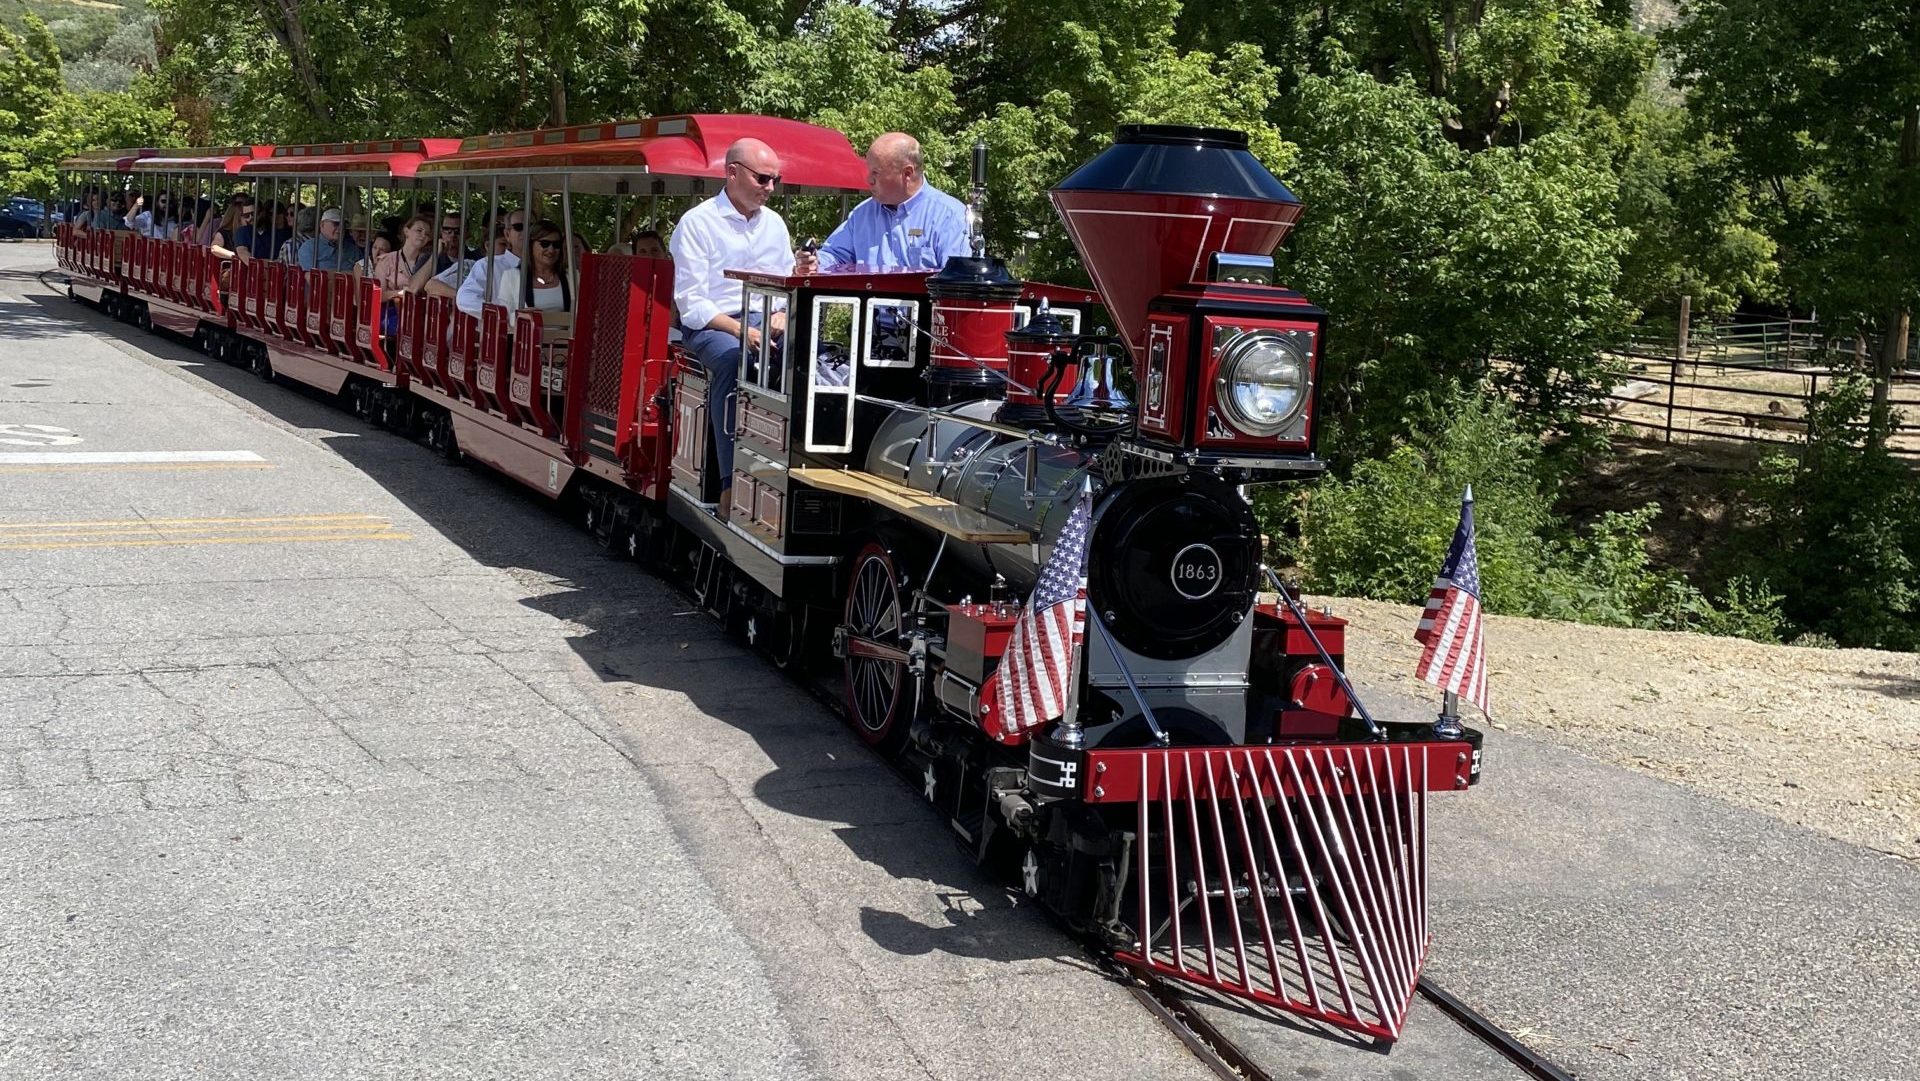 Gov. Cox drives zoo train to kick off the start of their new expansion...